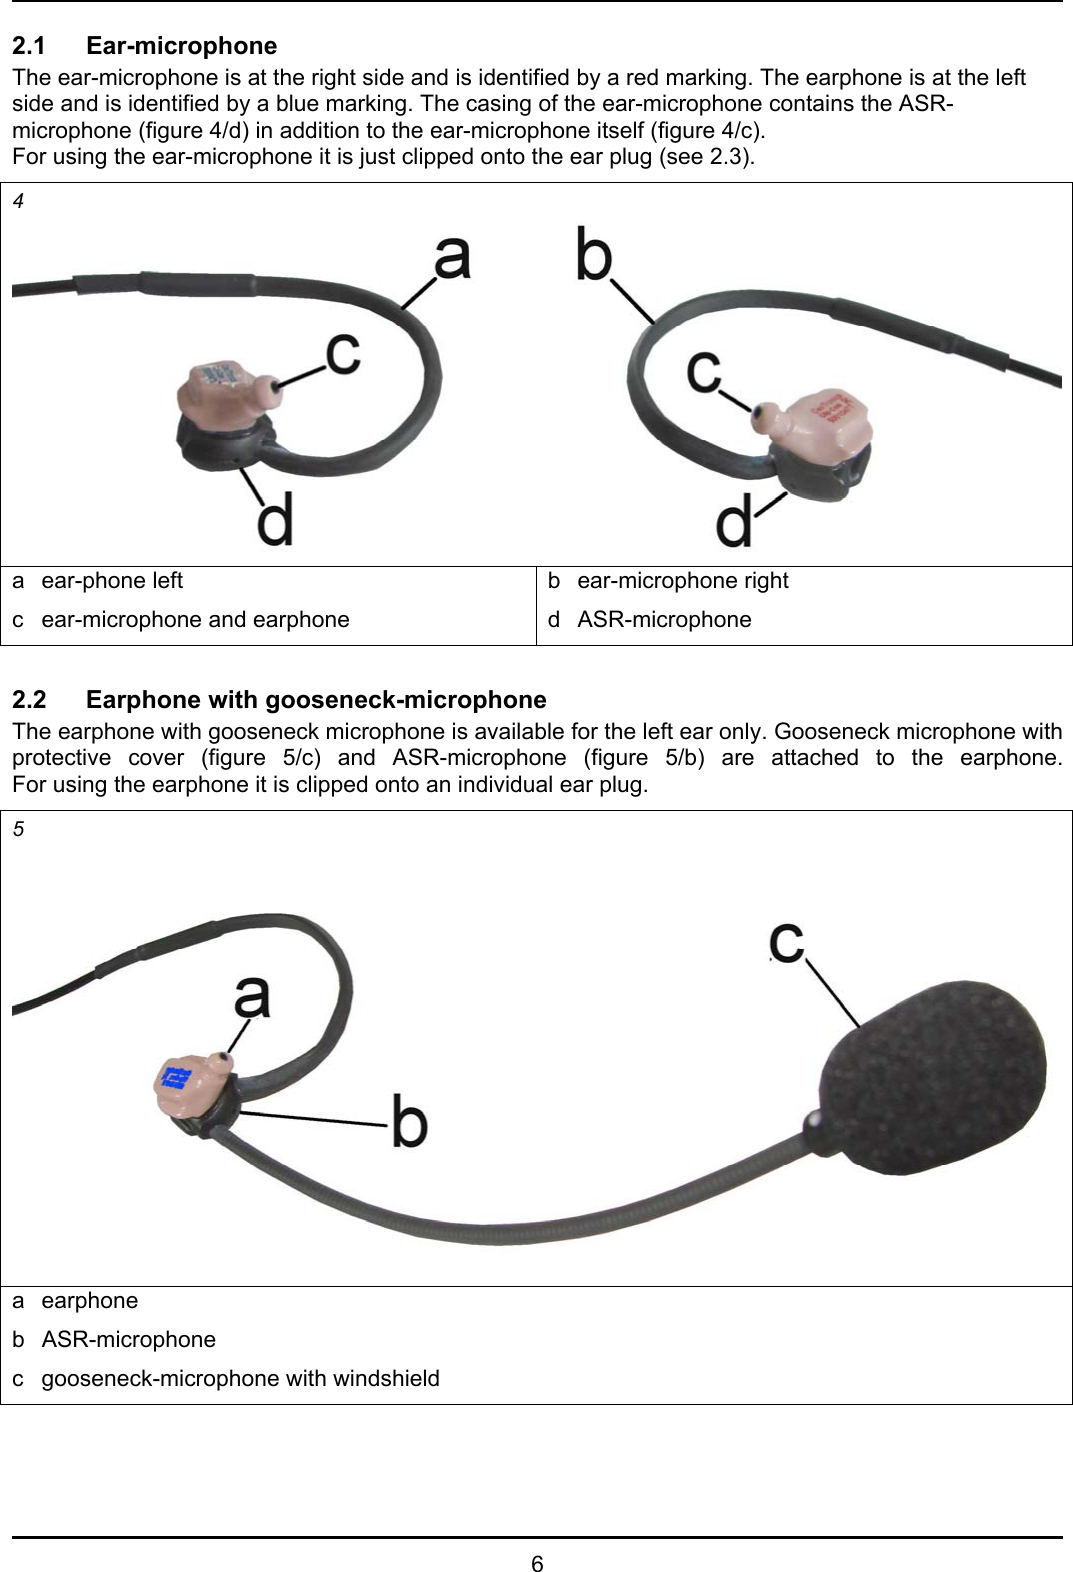   6 2.1 Ear-microphone The ear-microphone is at the right side and is identified by a red marking. The earphone is at the left side and is identified by a blue marking. The casing of the ear-microphone contains the ASR-microphone (figure 4/d) in addition to the ear-microphone itself (figure 4/c). For using the ear-microphone it is just clipped onto the ear plug (see 2.3). 4 a ear-phone left c  ear-microphone and earphone b ear-microphone right d ASR-microphone  2.2 Earphone with gooseneck-microphone The earphone with gooseneck microphone is available for the left ear only. Gooseneck microphone with protective cover (figure 5/c) and ASR-microphone (figure 5/b) are attached to the earphone. For using the earphone it is clipped onto an individual ear plug. 5 a earphone b ASR-microphone c  gooseneck-microphone with windshield  